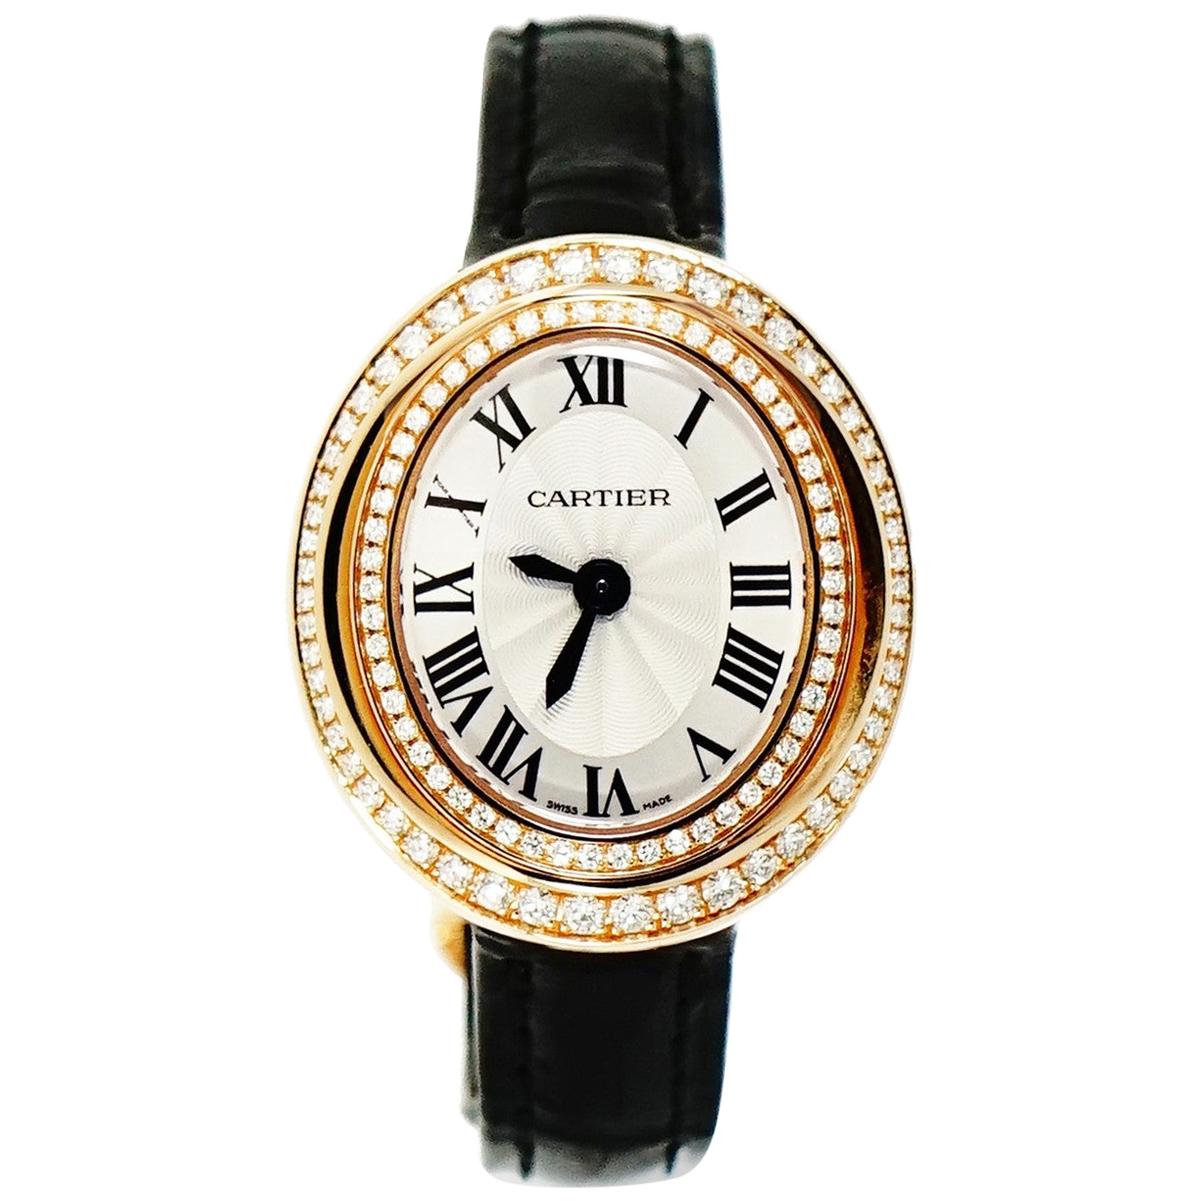 Cartier Hypnose Small Size WJHY0003 in 18 Karat Rose Gold